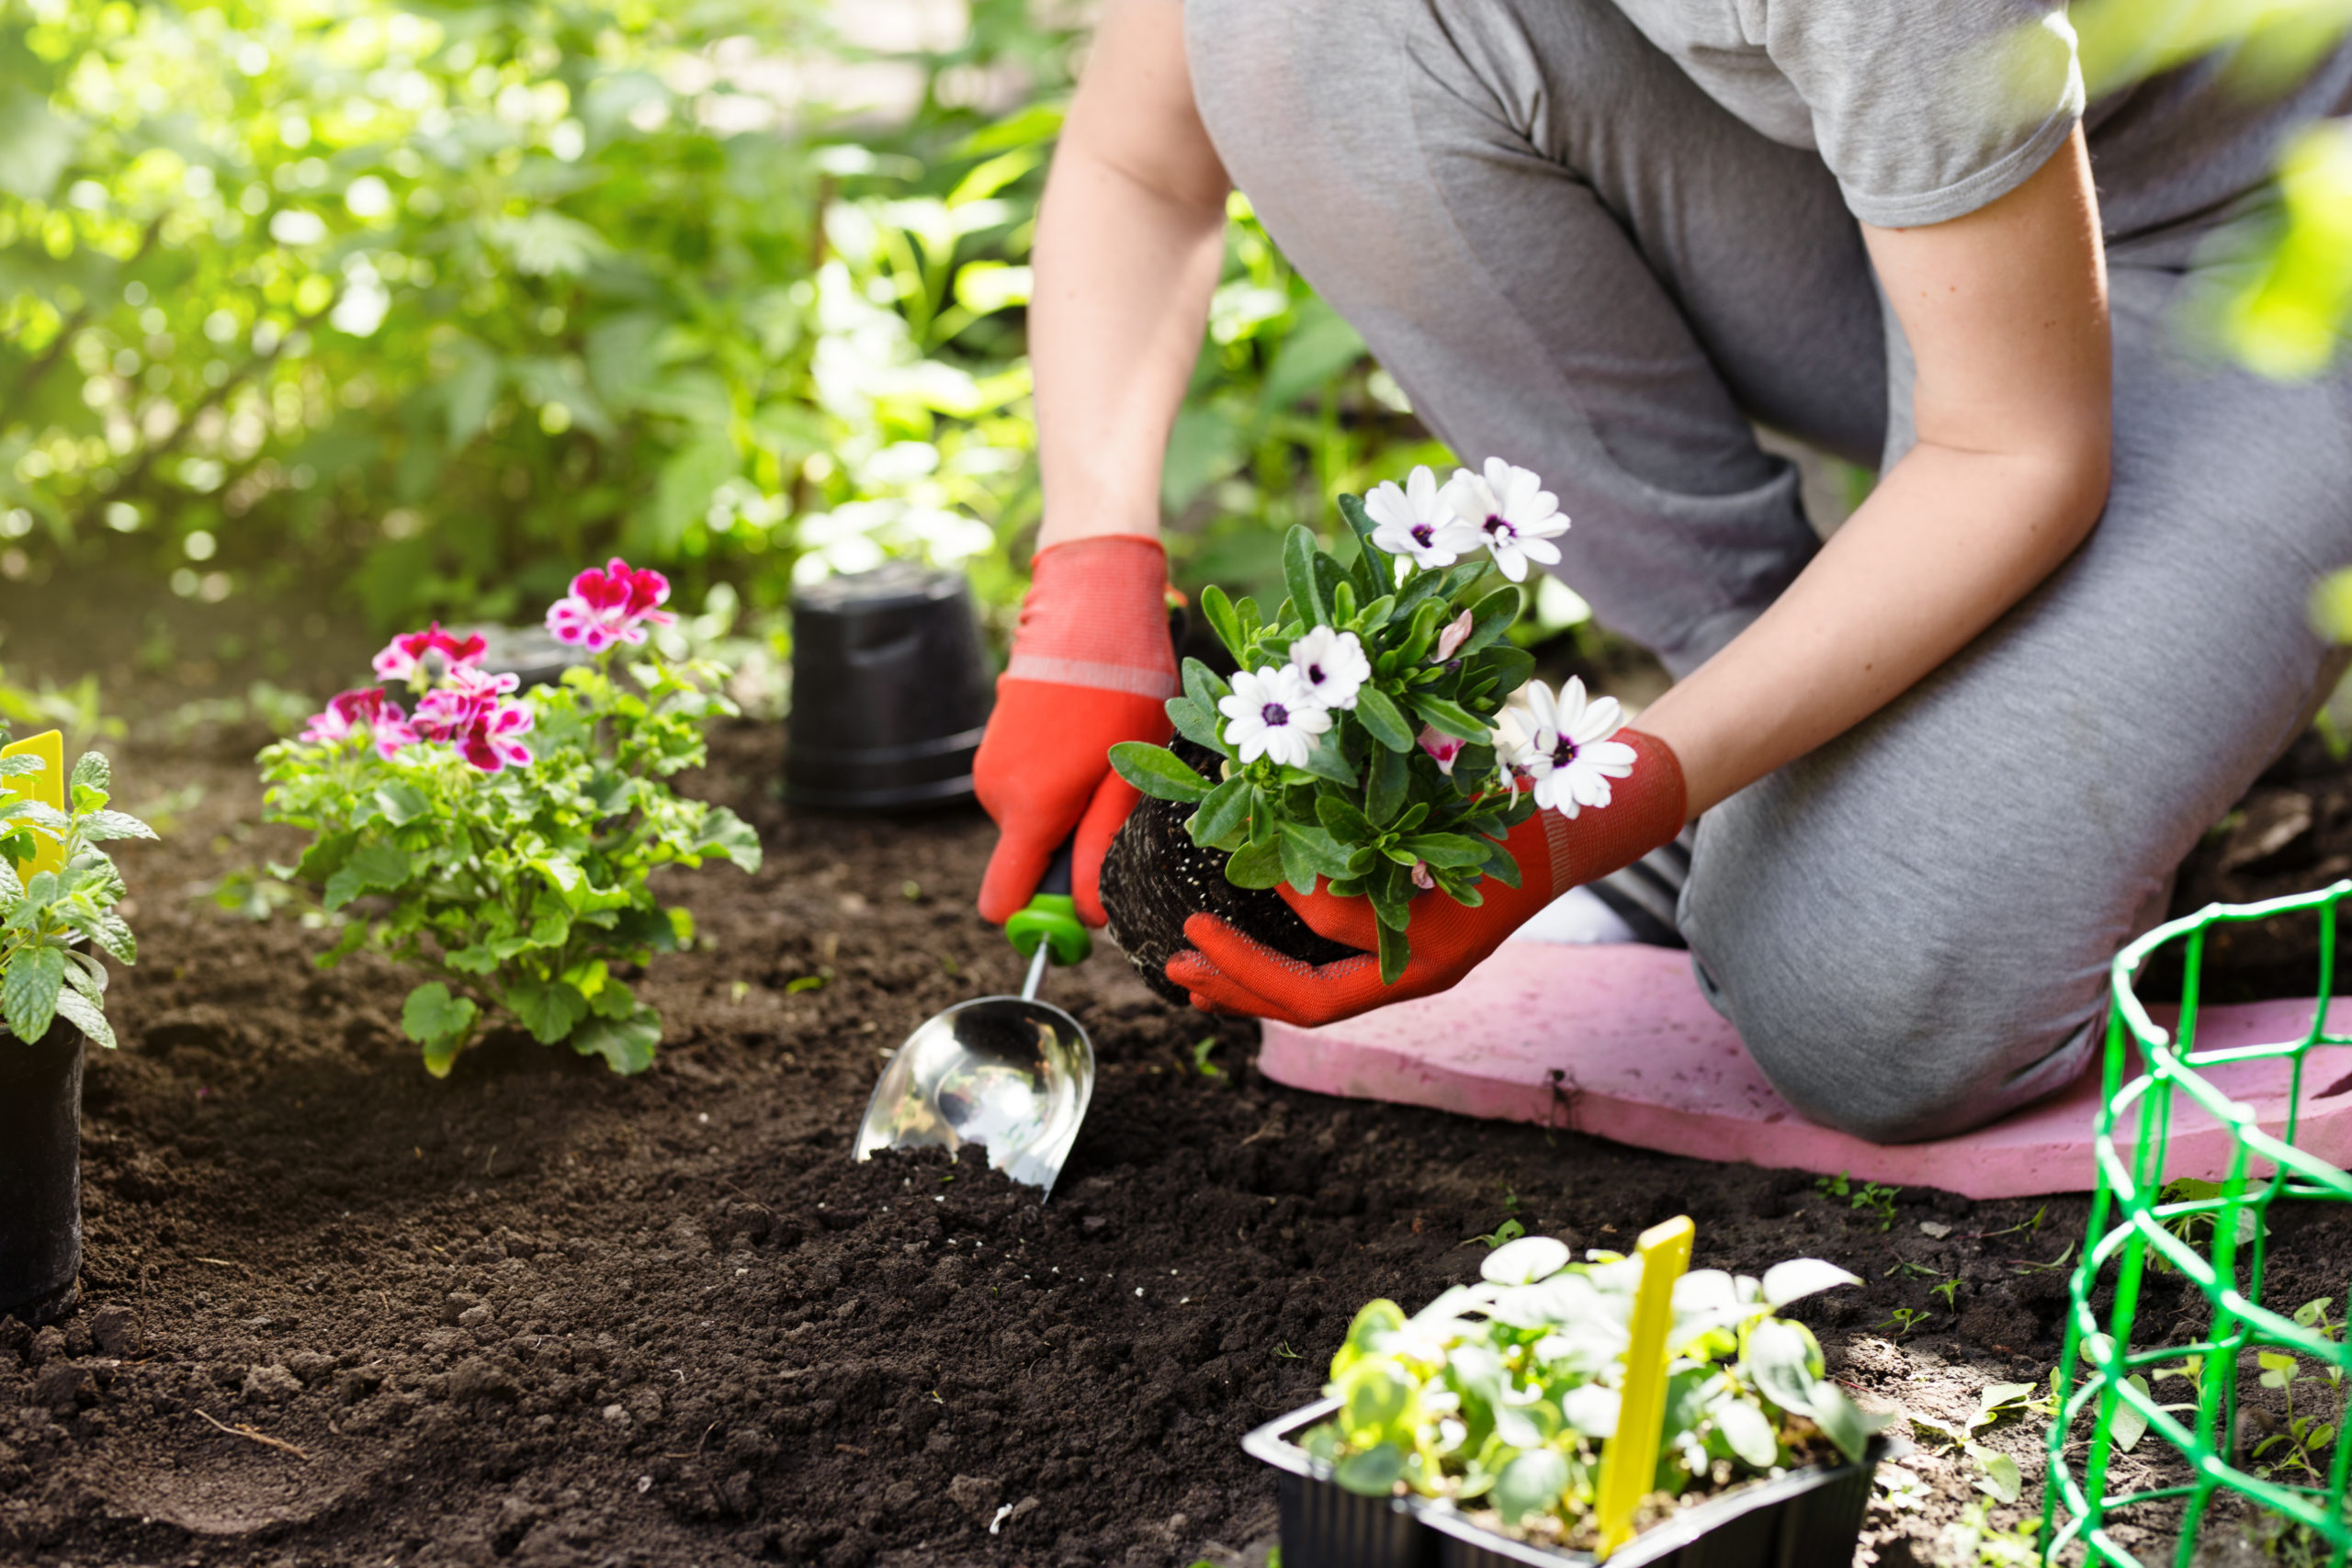 Learn how strength training can help during this gardening season